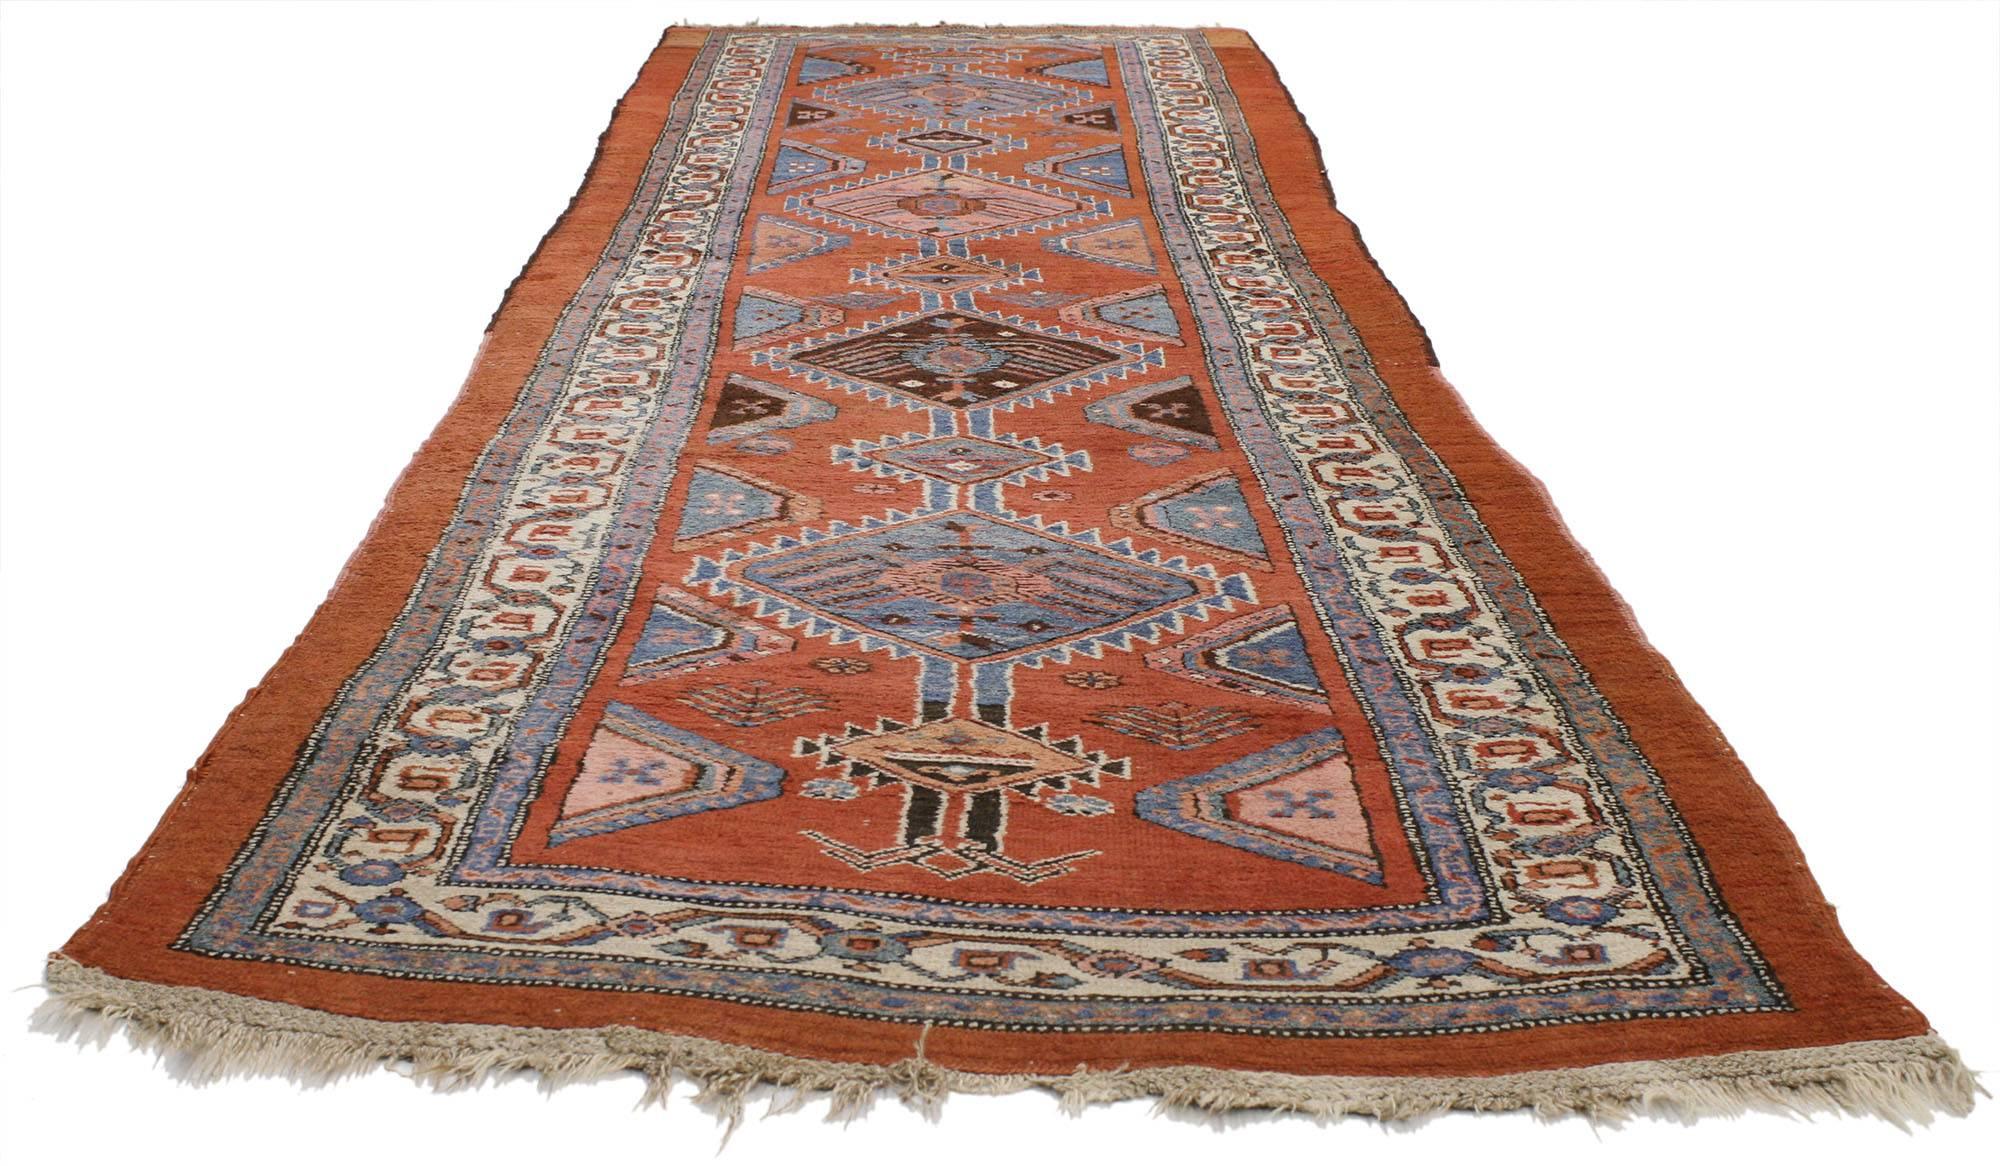 77054, Antique Persian Kurdish Hallway Runner with Tribal Style. Tribal with classic appeal, this antique Persian Kurdish runner features a row of beautiful baby blue, pink, and brown diamonds that anchor the field. Baby blue mounds ornament the